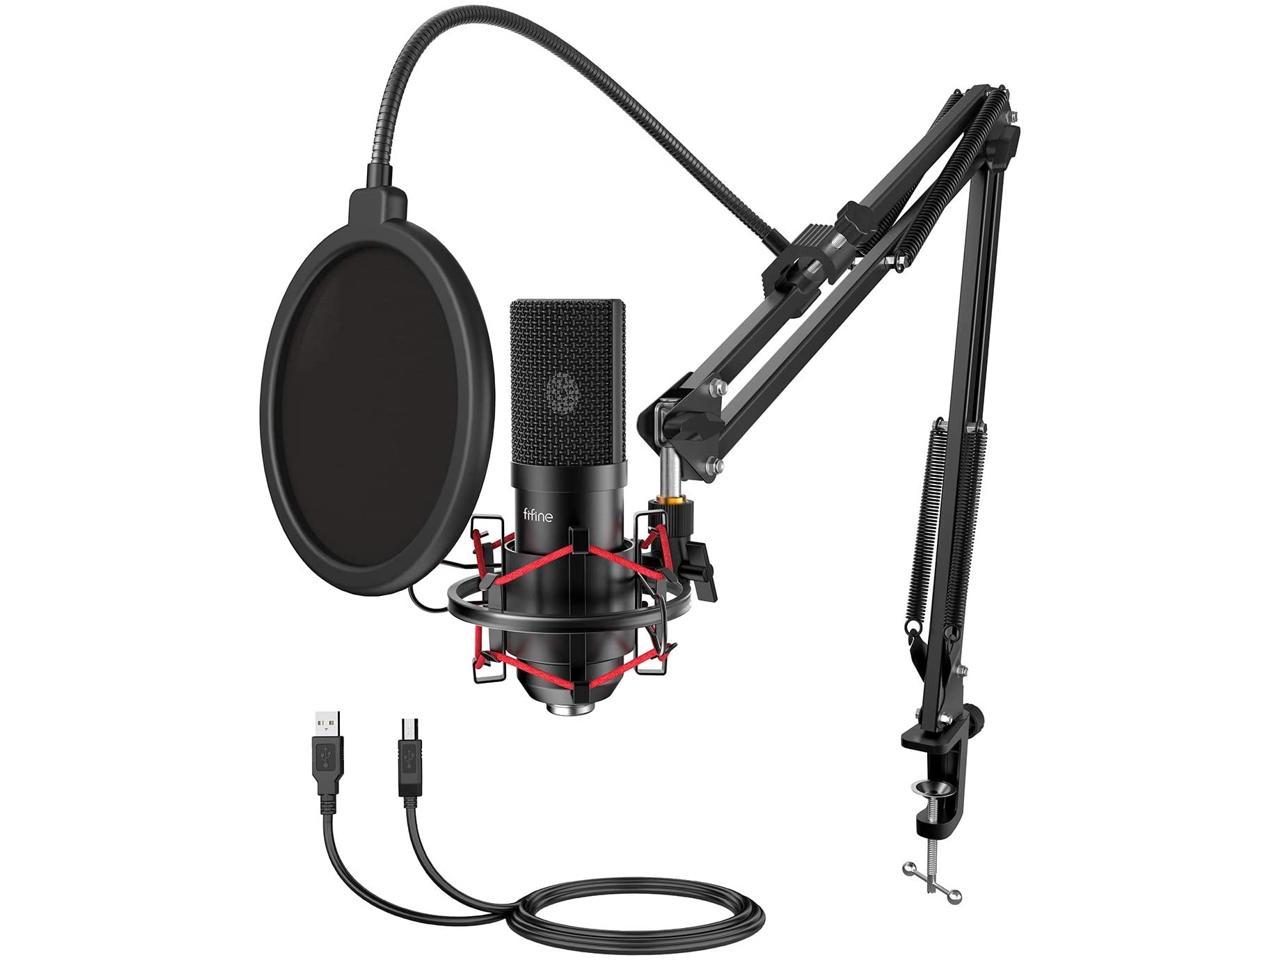 FIFINE USB Gaming Microphone Set with Flexible Arm Stand Pop 